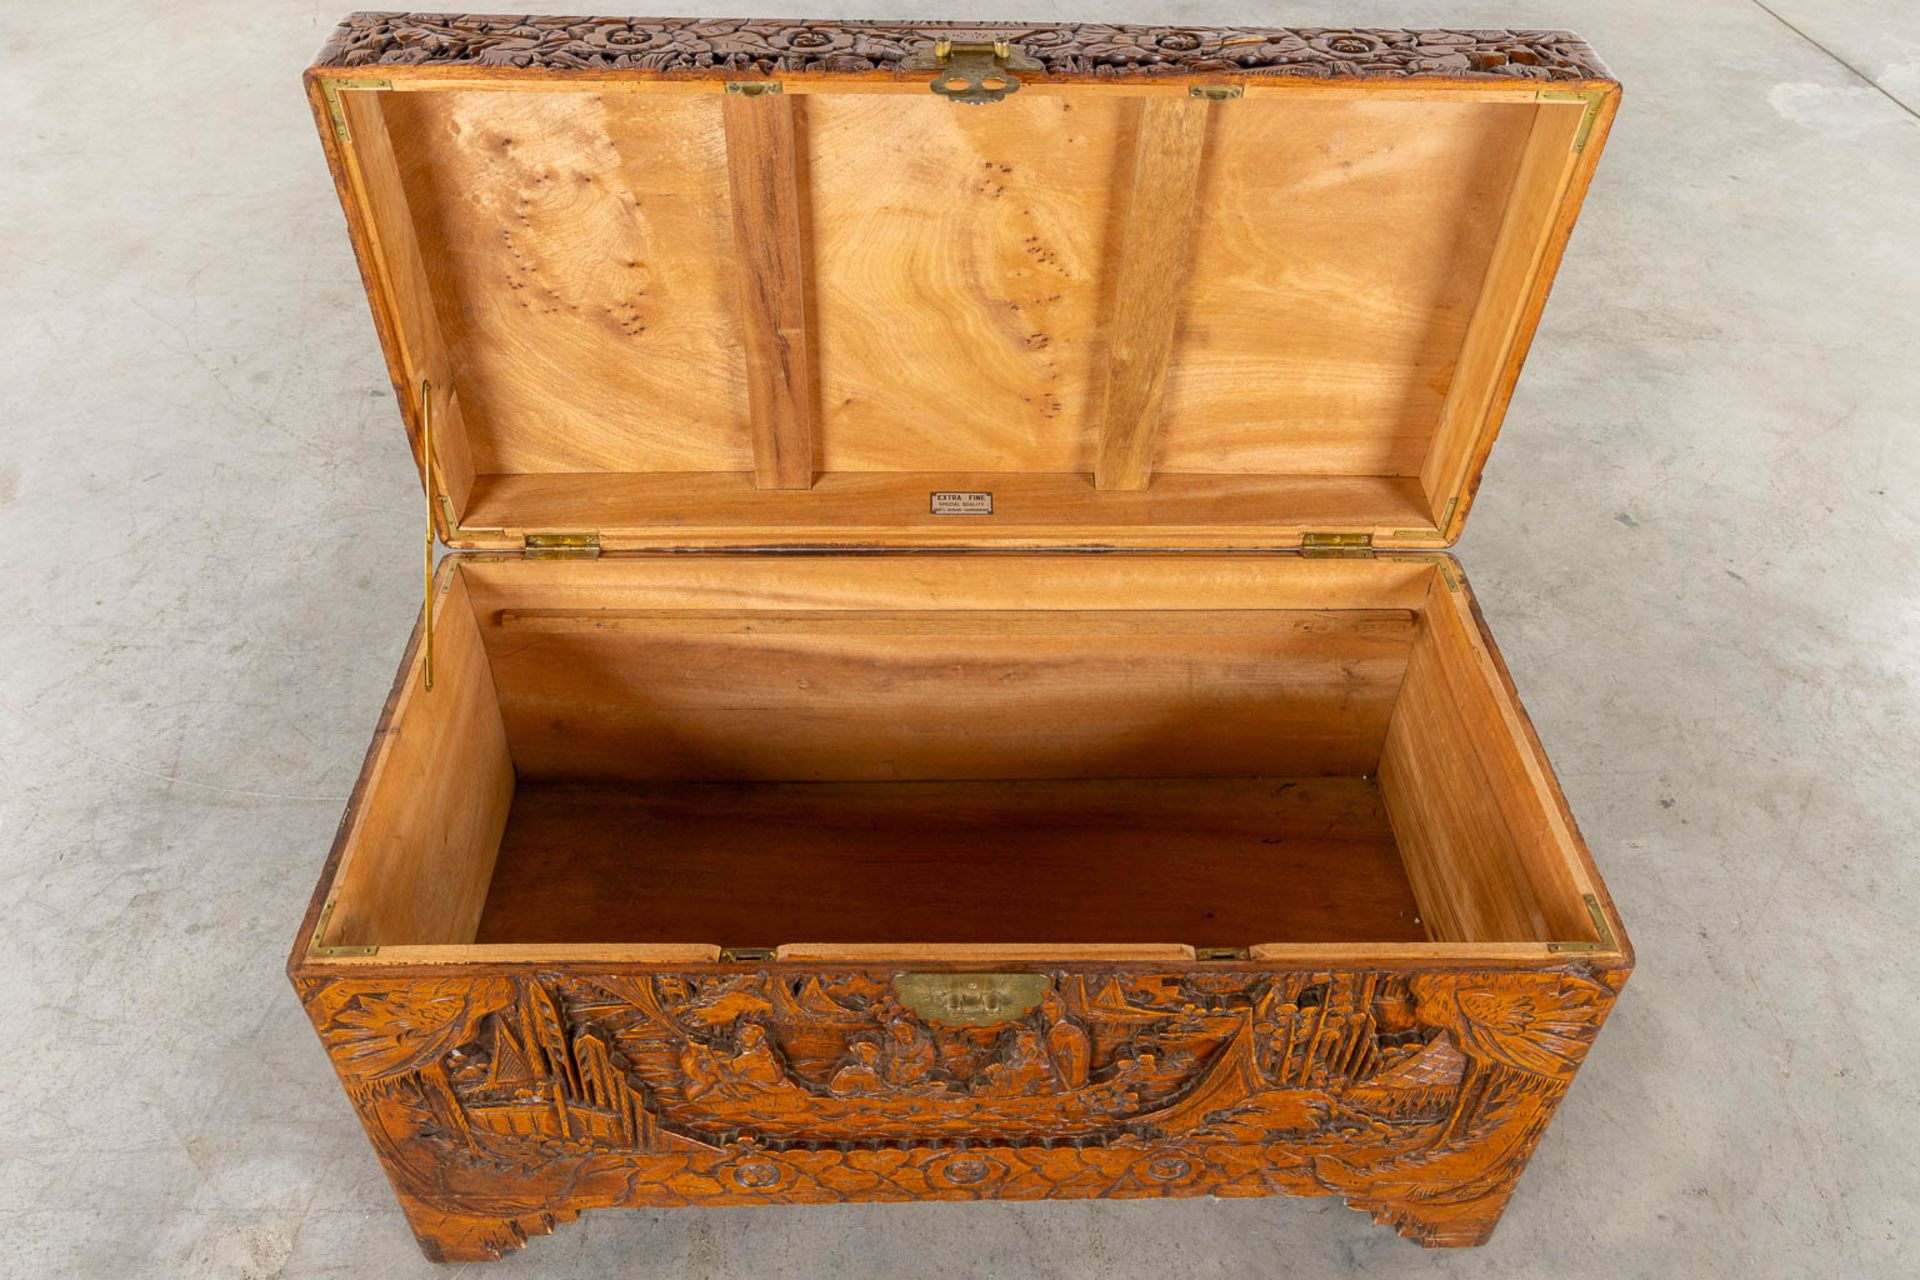 Two Oriental chests, tropical hardwood. Probably Myanmar. (L:50 x W:102 x H:60 cm) - Image 20 of 21